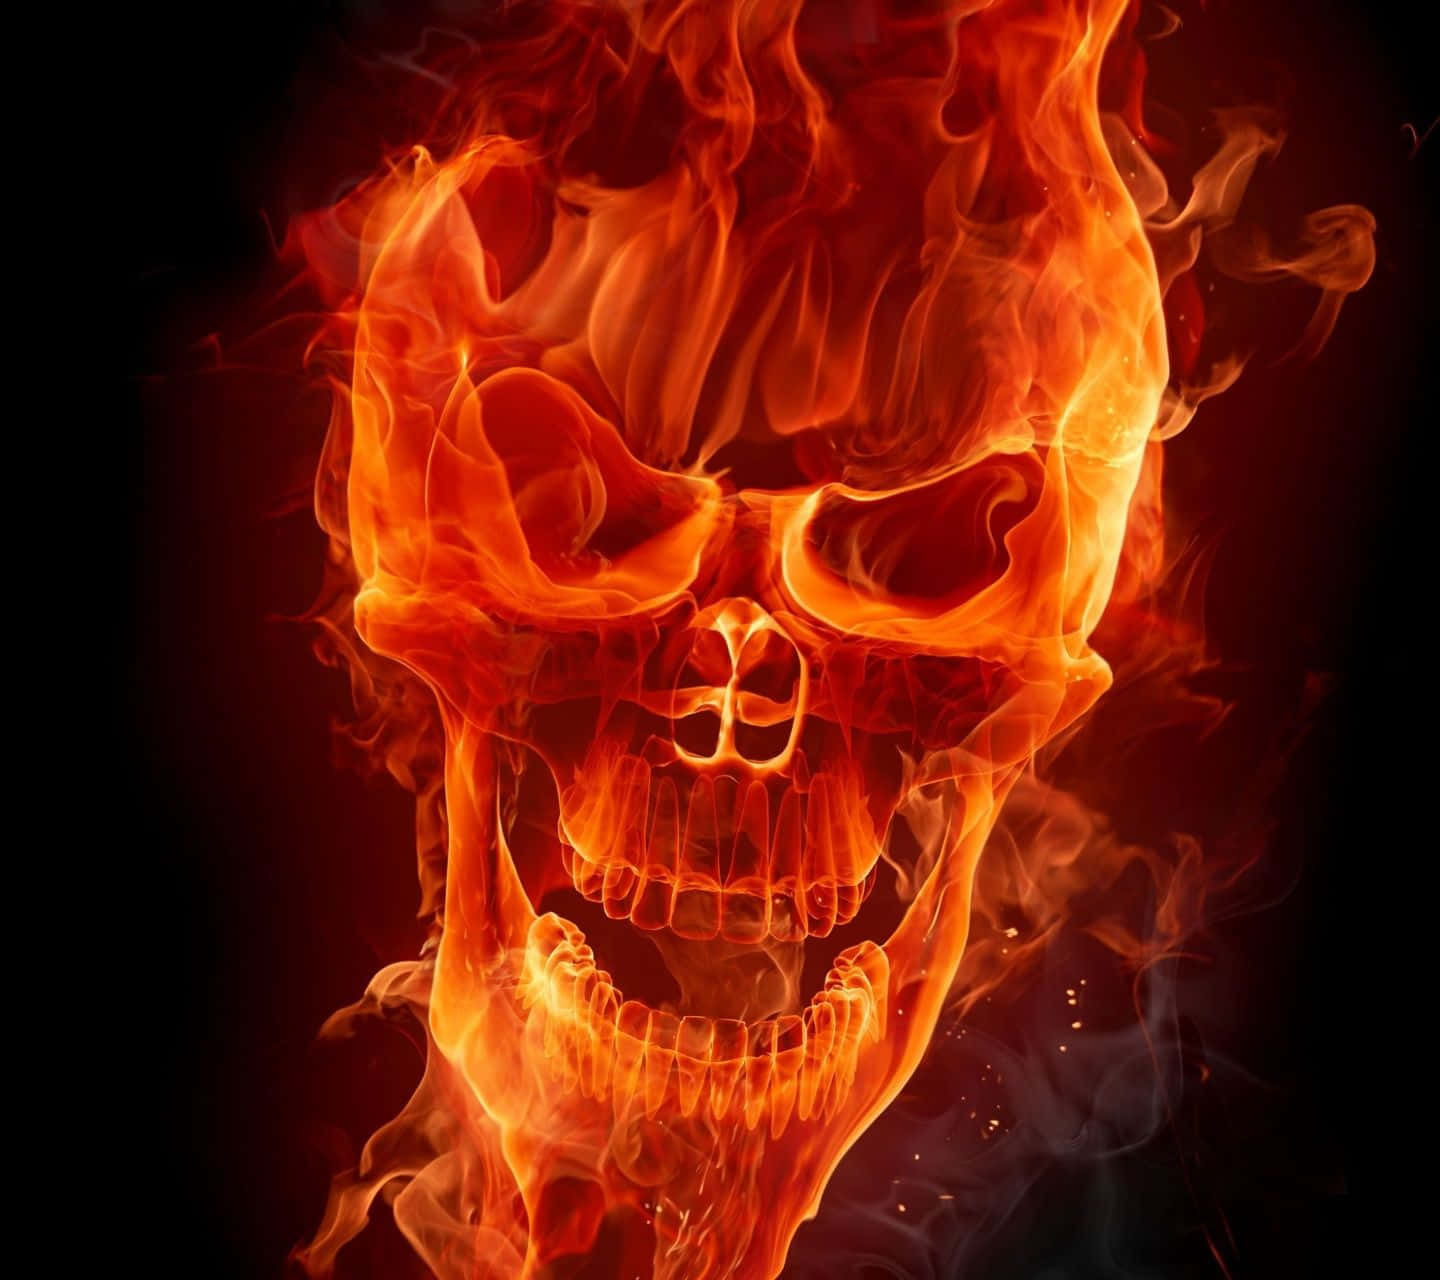 An intimidating red flame skull adorned with menacing facial features. Wallpaper